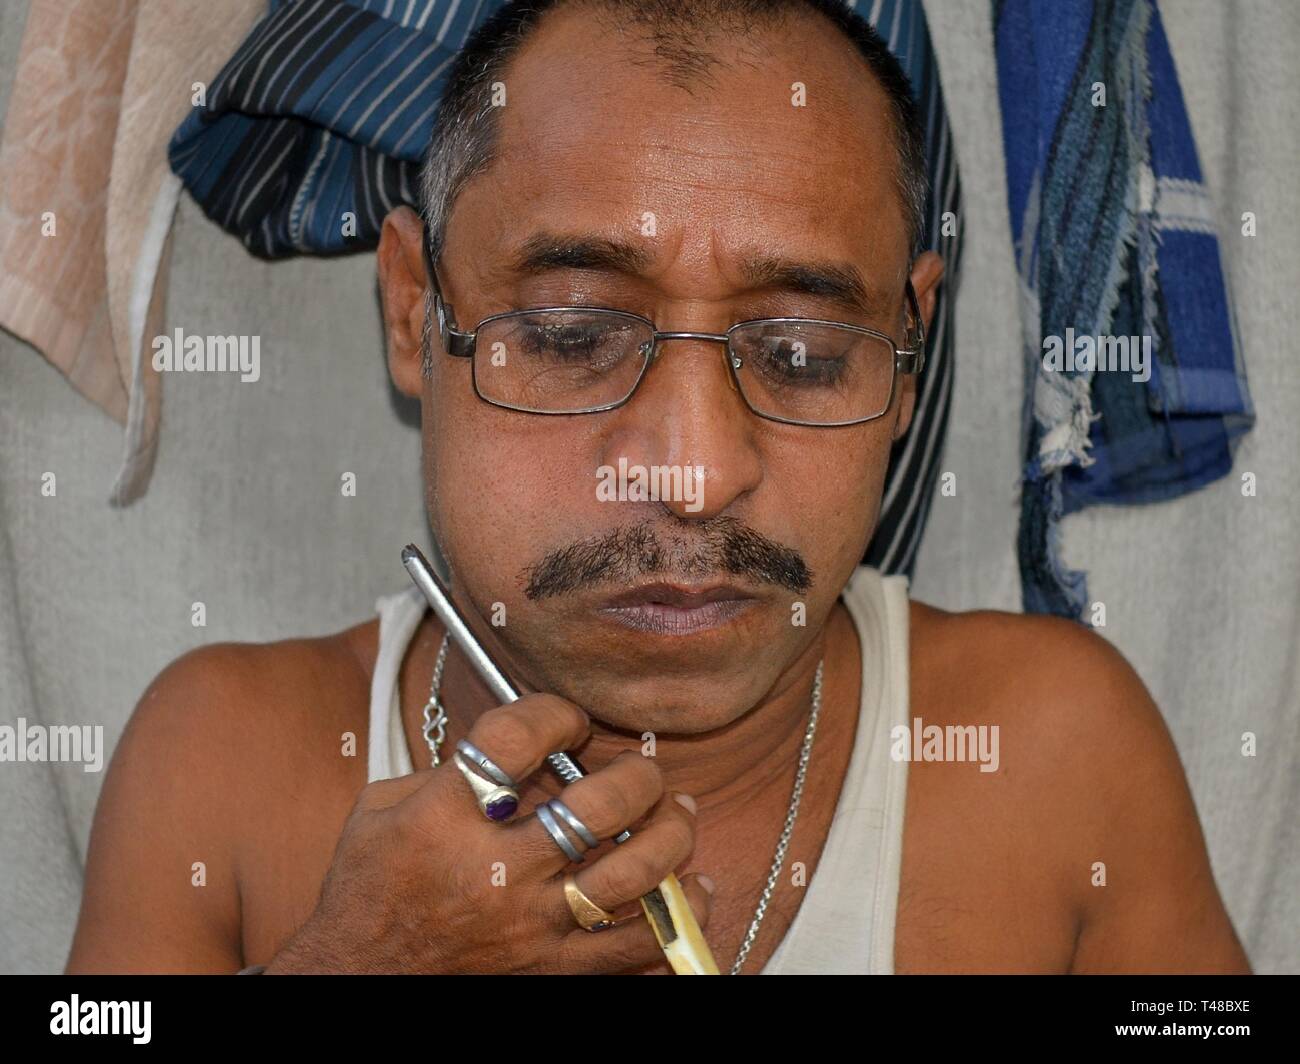 Funny Indian curbside barber with puffed up cheeks trims his menjou moustache with a straight razor. Stock Photo